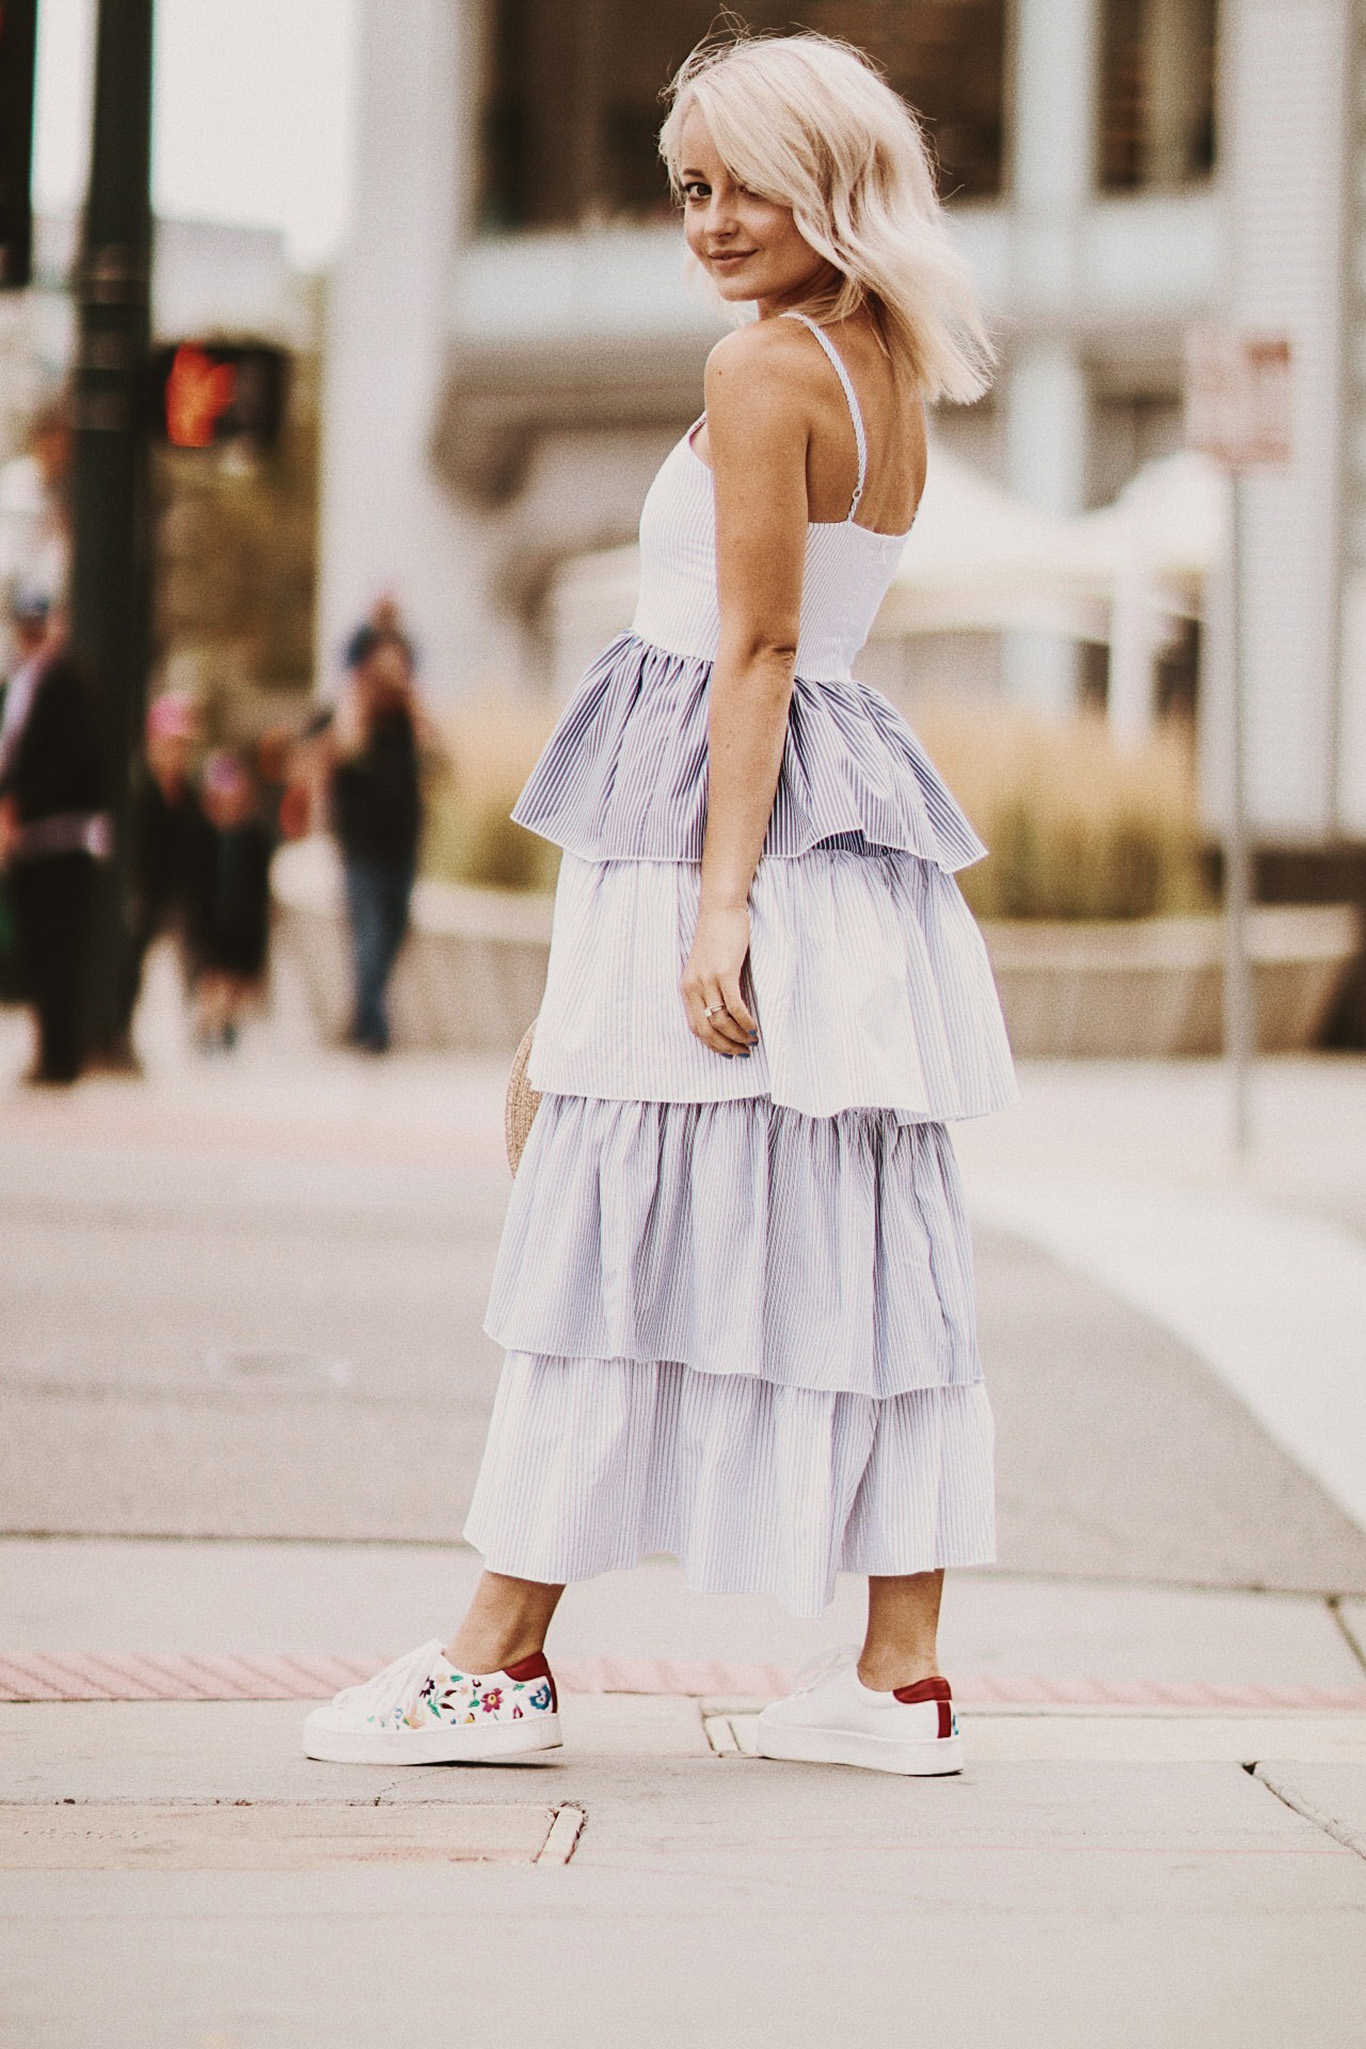 HOW TO PAIR TENNIS SHOES WITH A MAXI DRESS